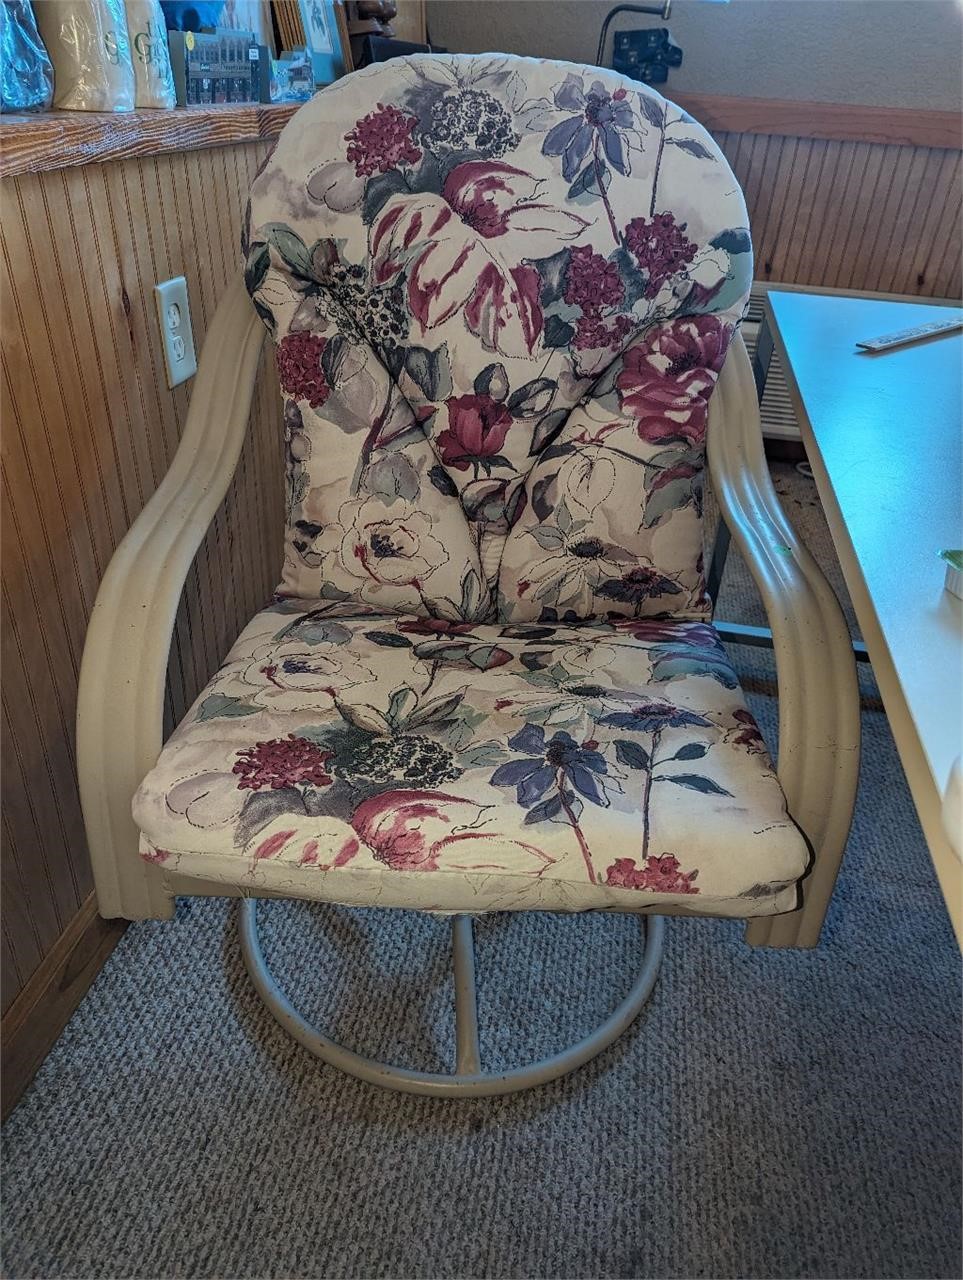 June Consignment Auction 2 ends 6/30